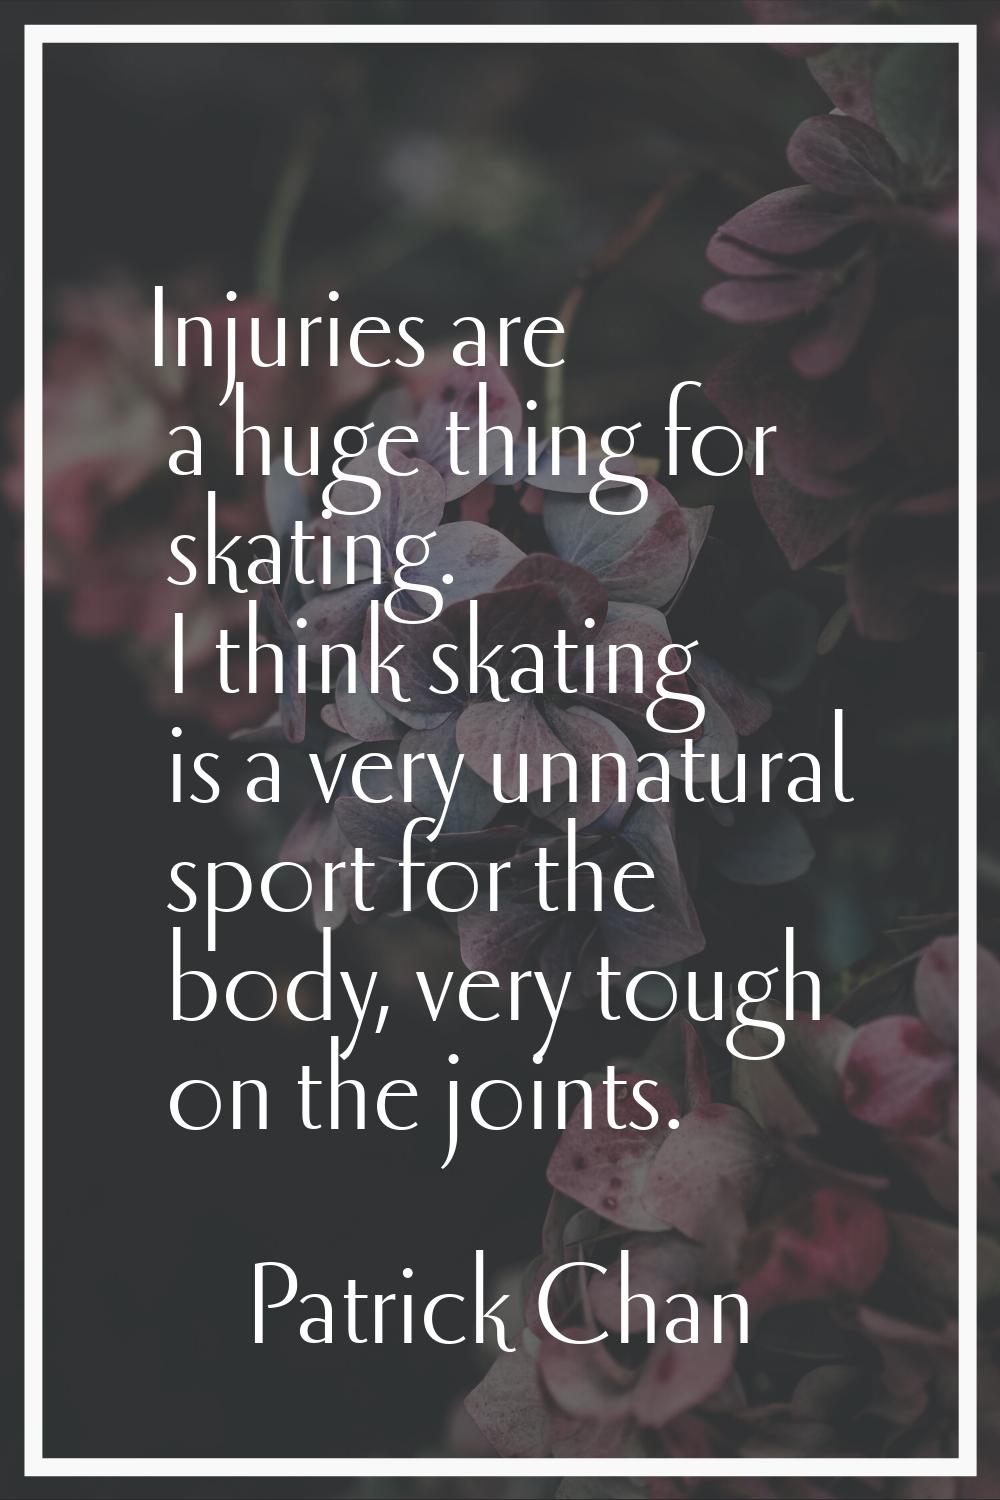 Injuries are a huge thing for skating. I think skating is a very unnatural sport for the body, very